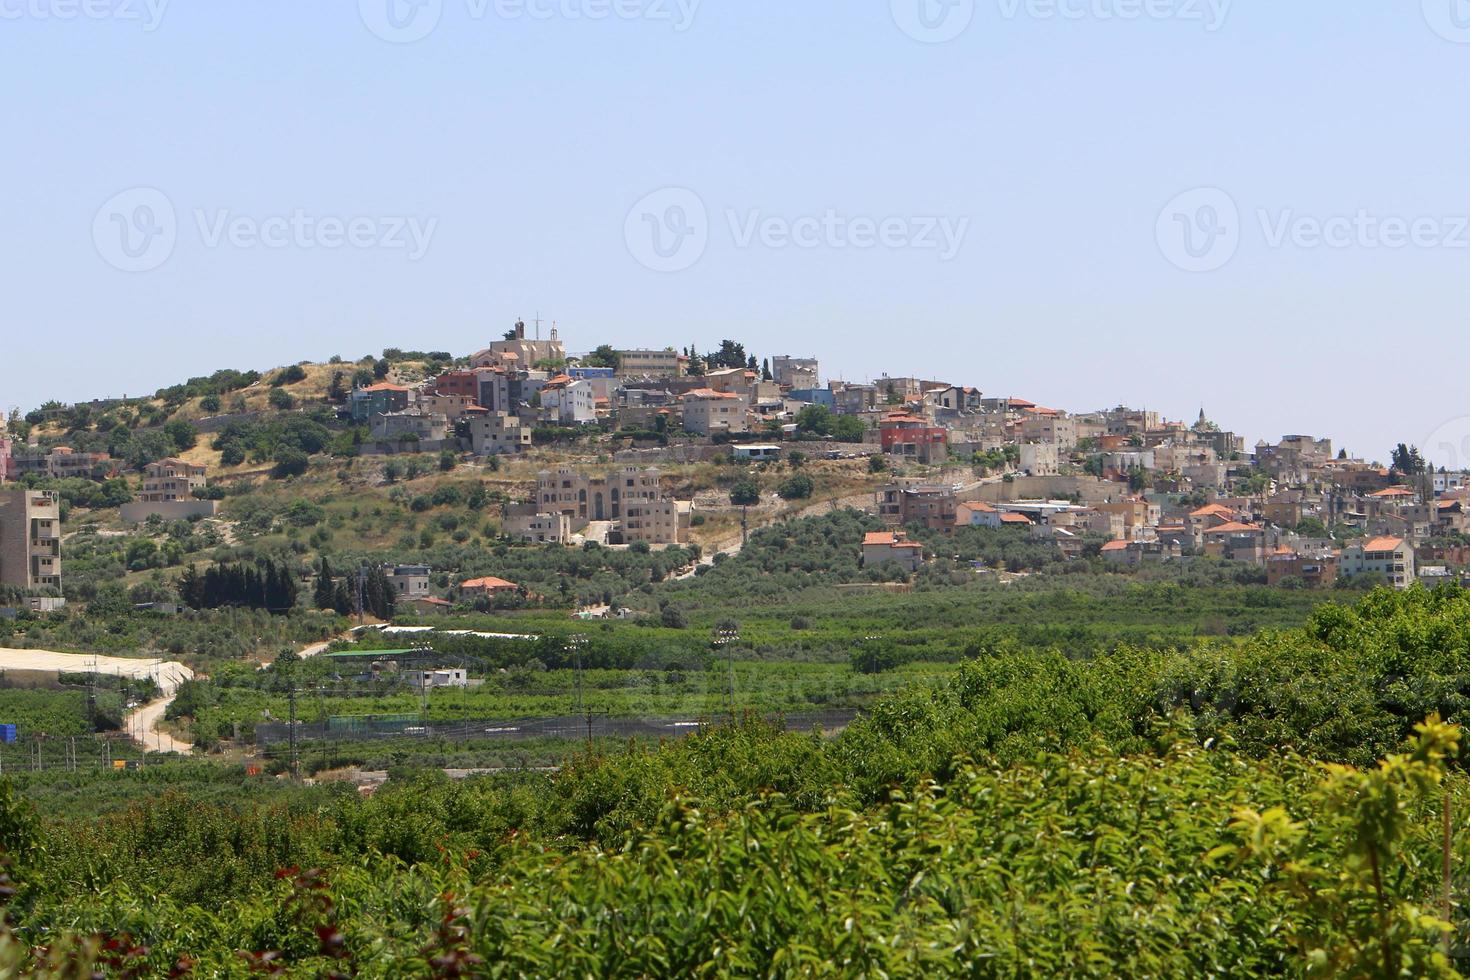 Landscape in a small town in northern Israel. photo